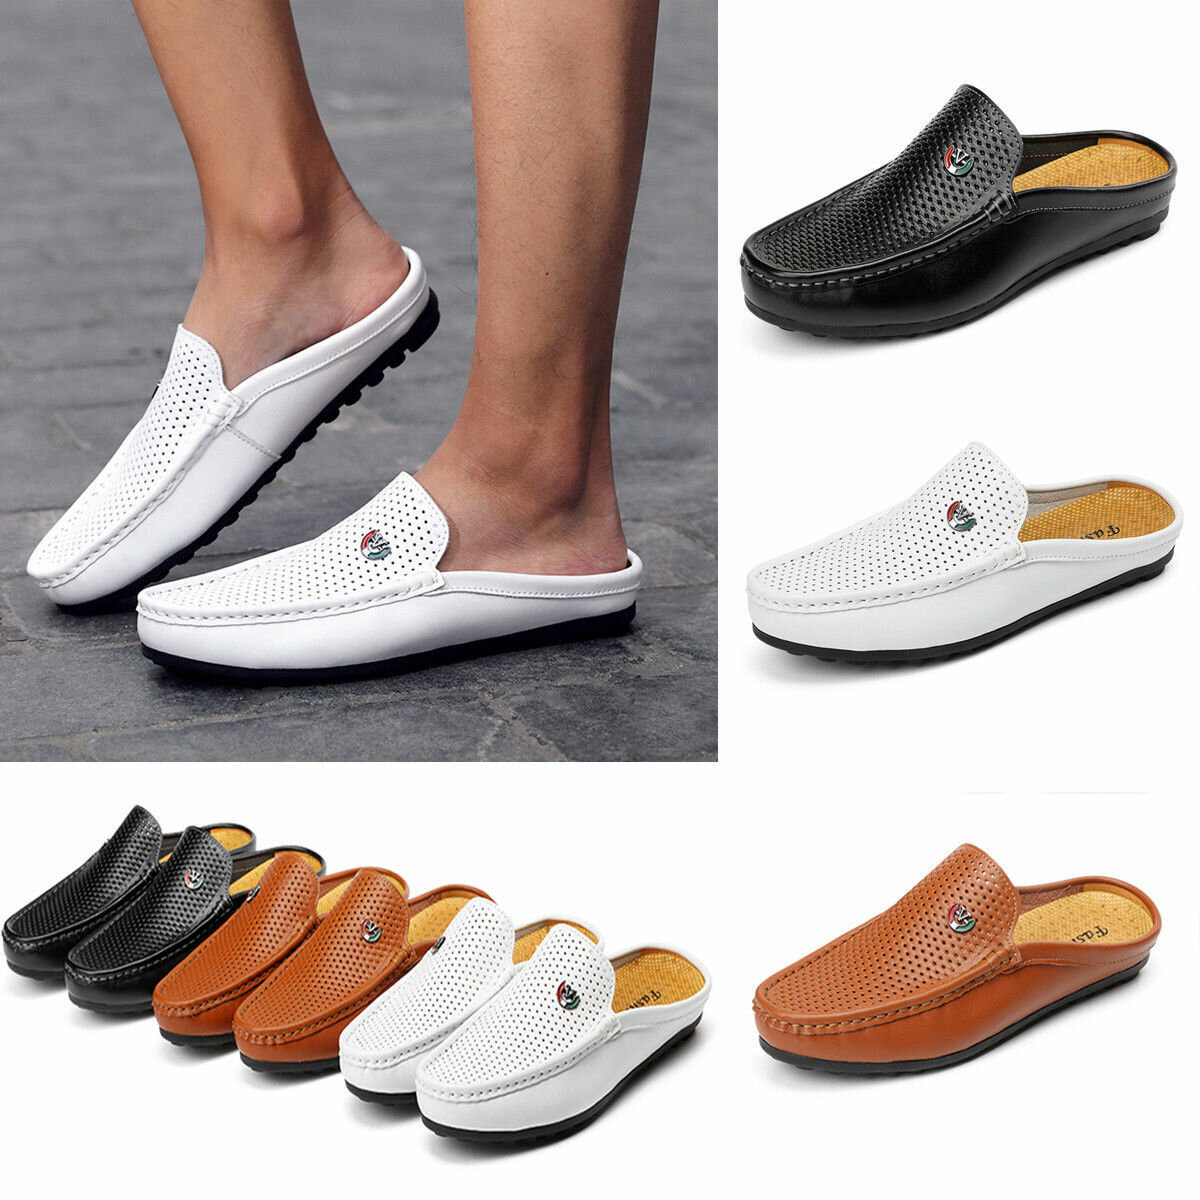 Men's Slip On Casual Canvas Skate Trainers Shoes Outdoor Leisure Walking Sneakers Loafers Shoes